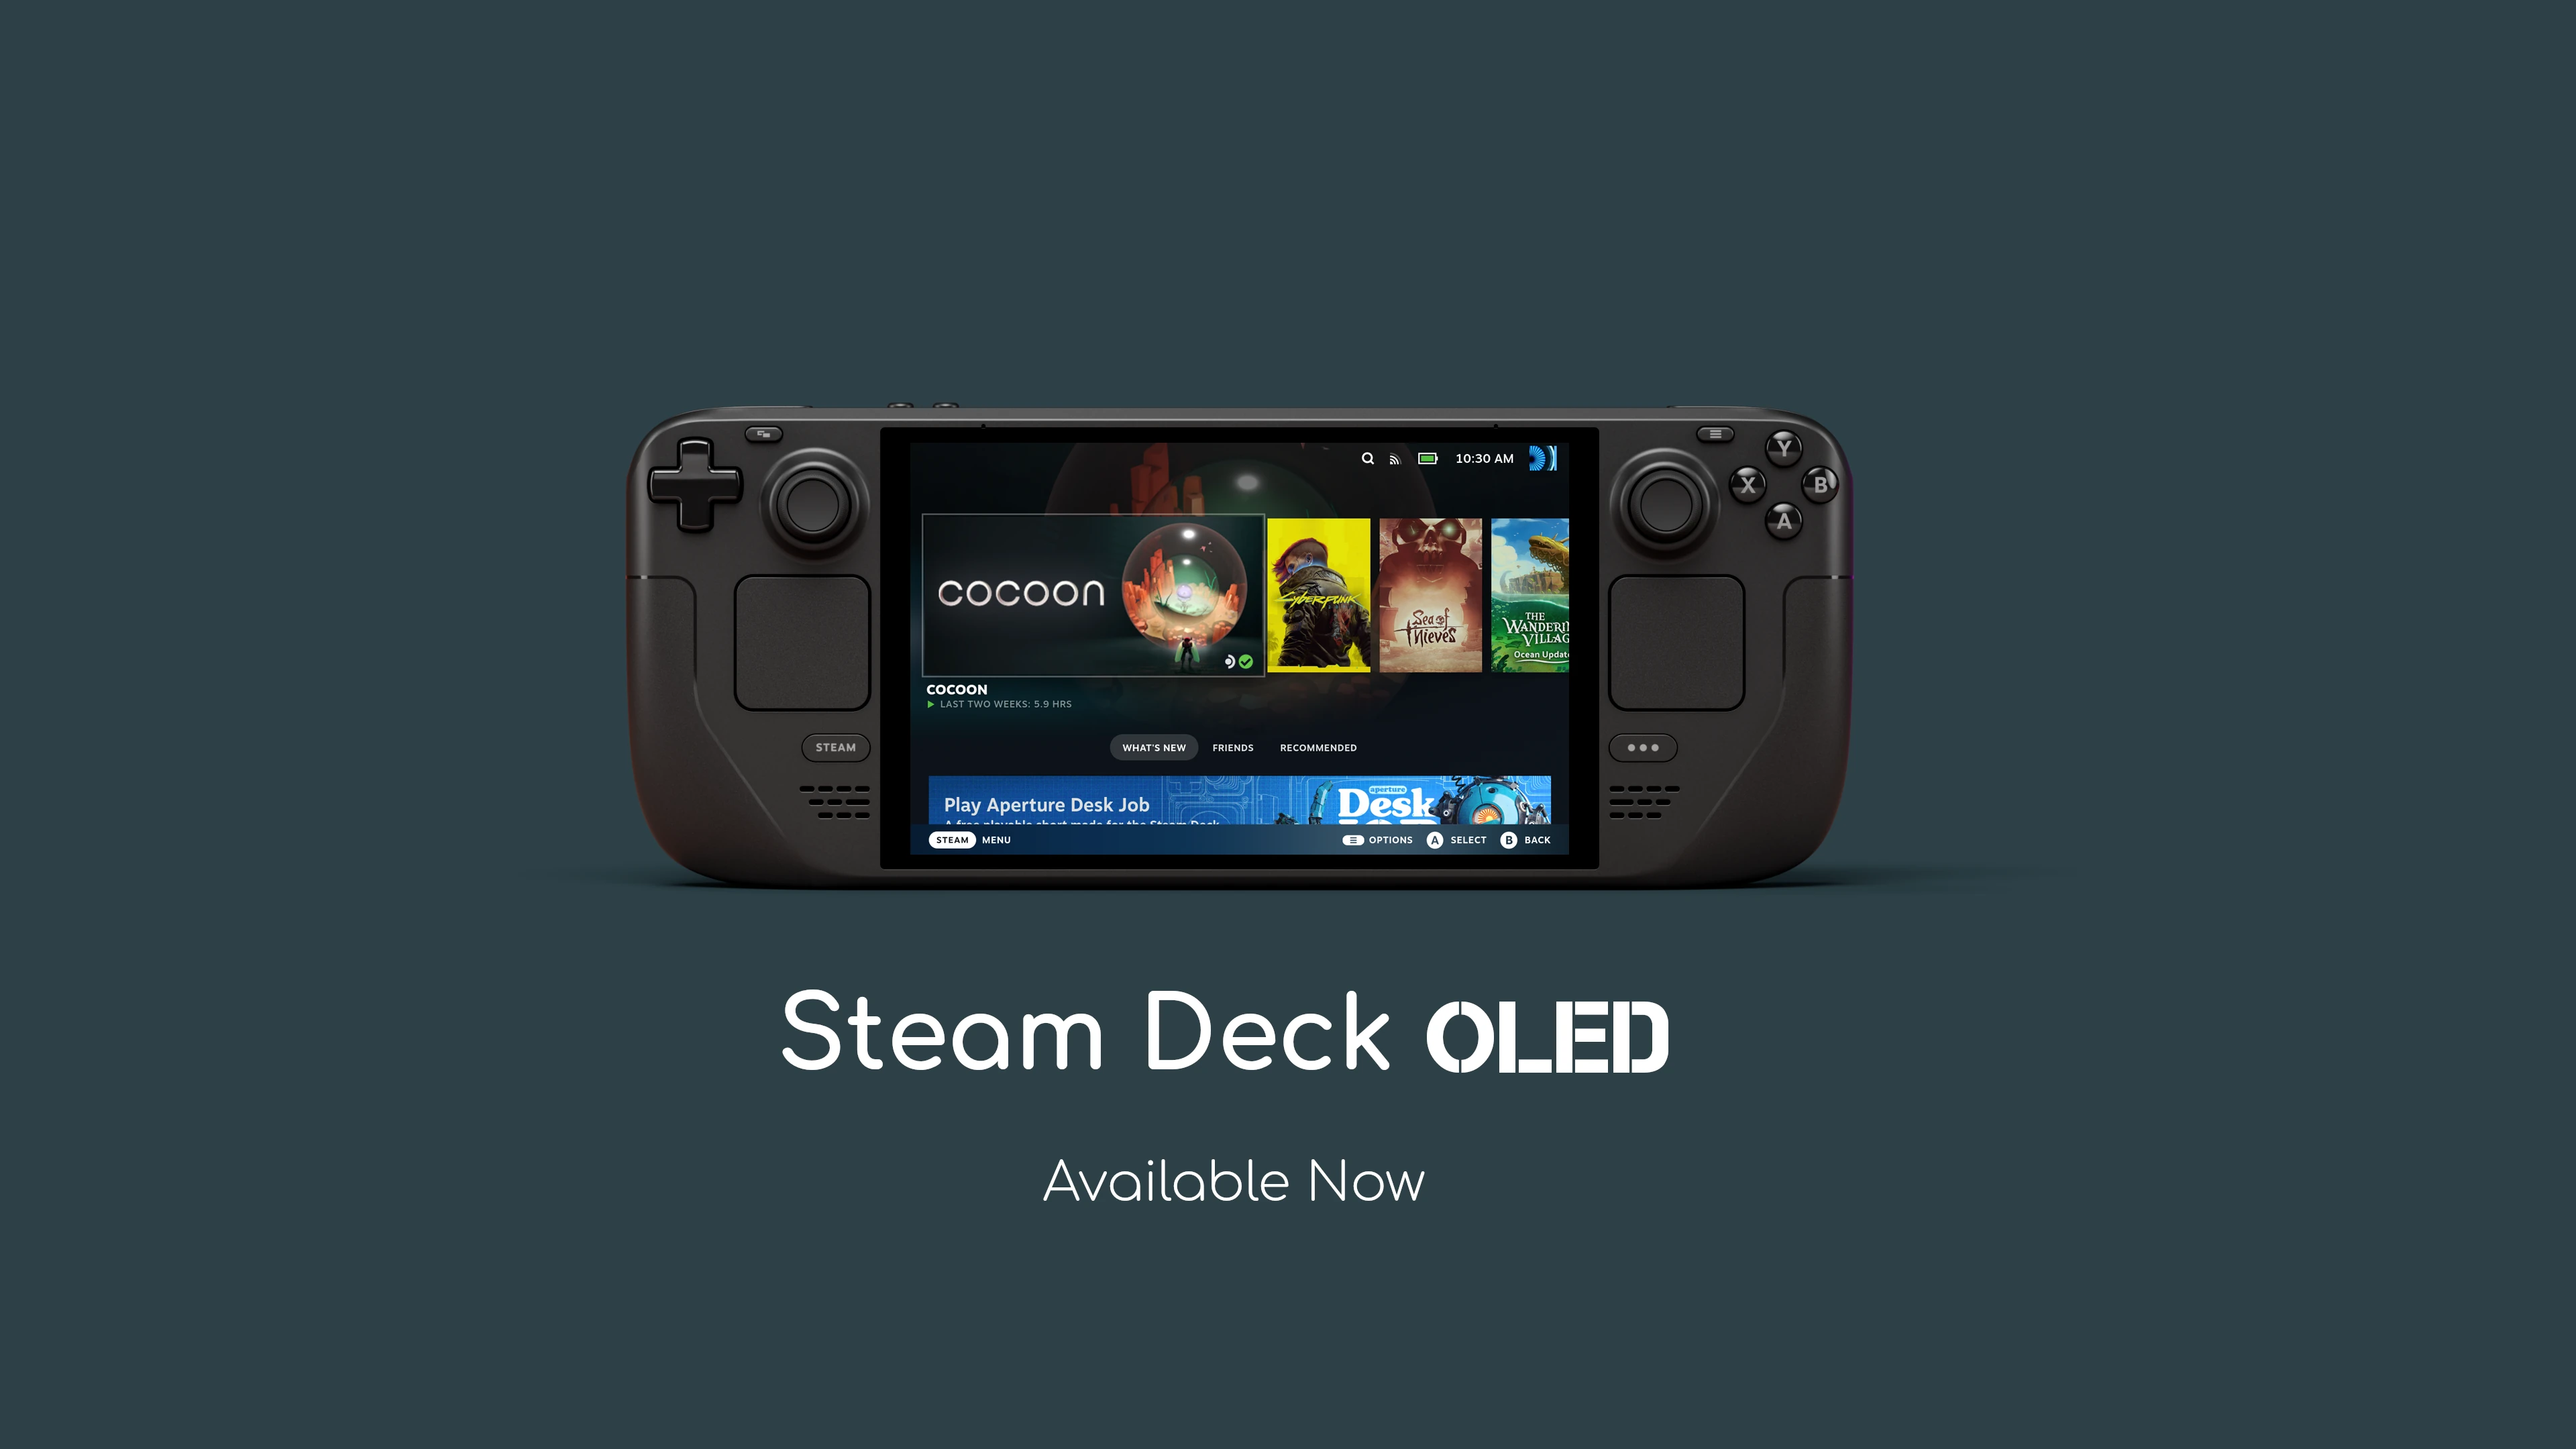 Steam Deck OLED Is Now Available to Order with HDR Display and Bigger Battery